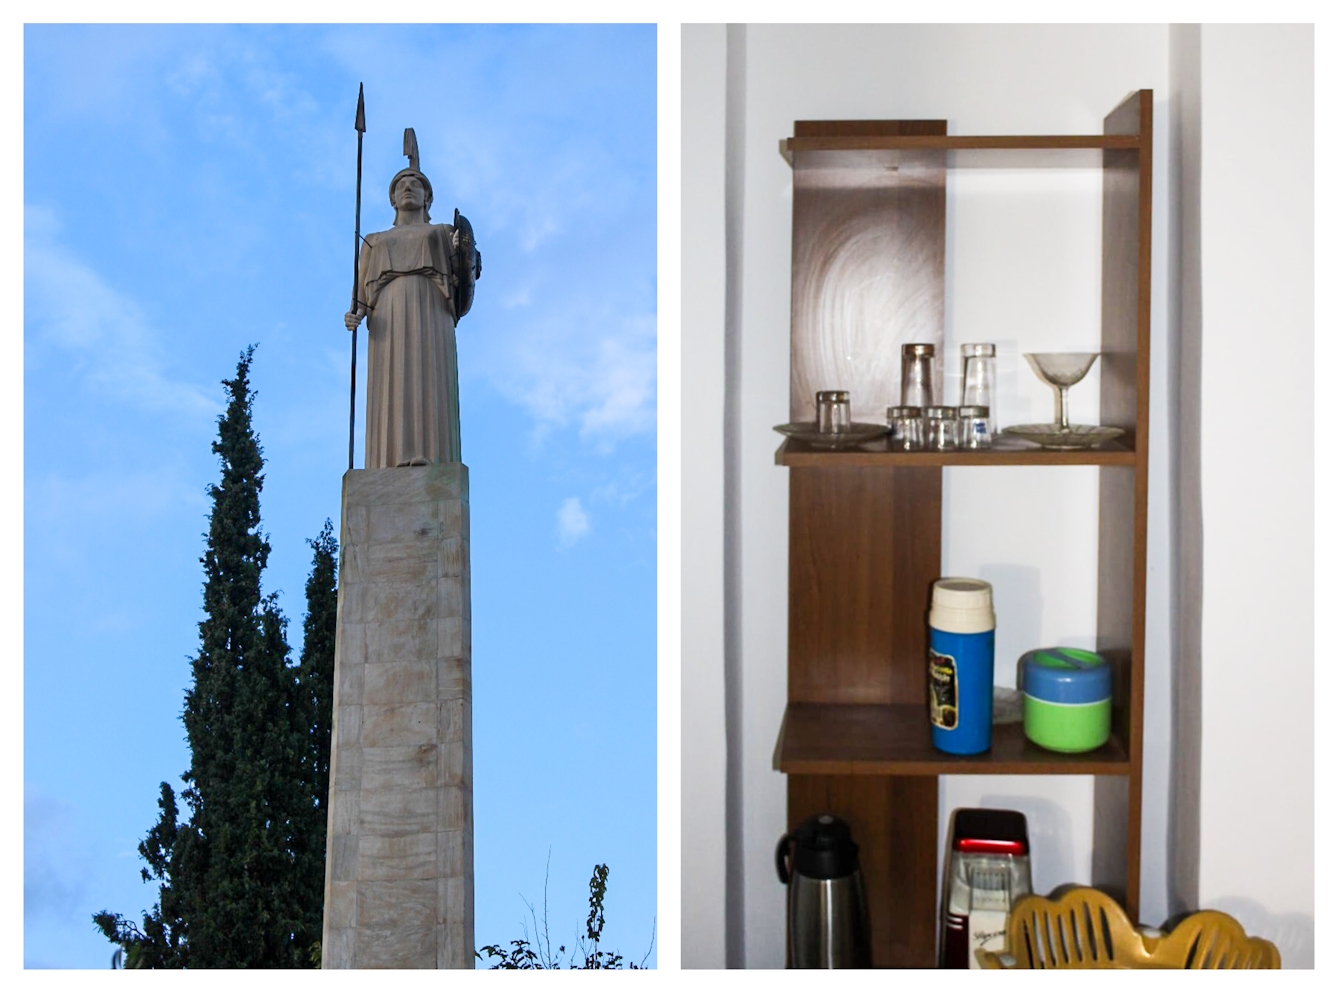 Photographic colour diptych. The image on the left shows a view looking up at a large statue of a woman carrying a shield and a spear and wearing an ornate helmet. She is stood on a large square column that rises up nest to a cluster of fir trees.  The image on the right shows an internal view of a tall wooden shelving unit in the corner of a white walled room. On the shelves re household items such as drinking glasses, plastic tubs and a flask.